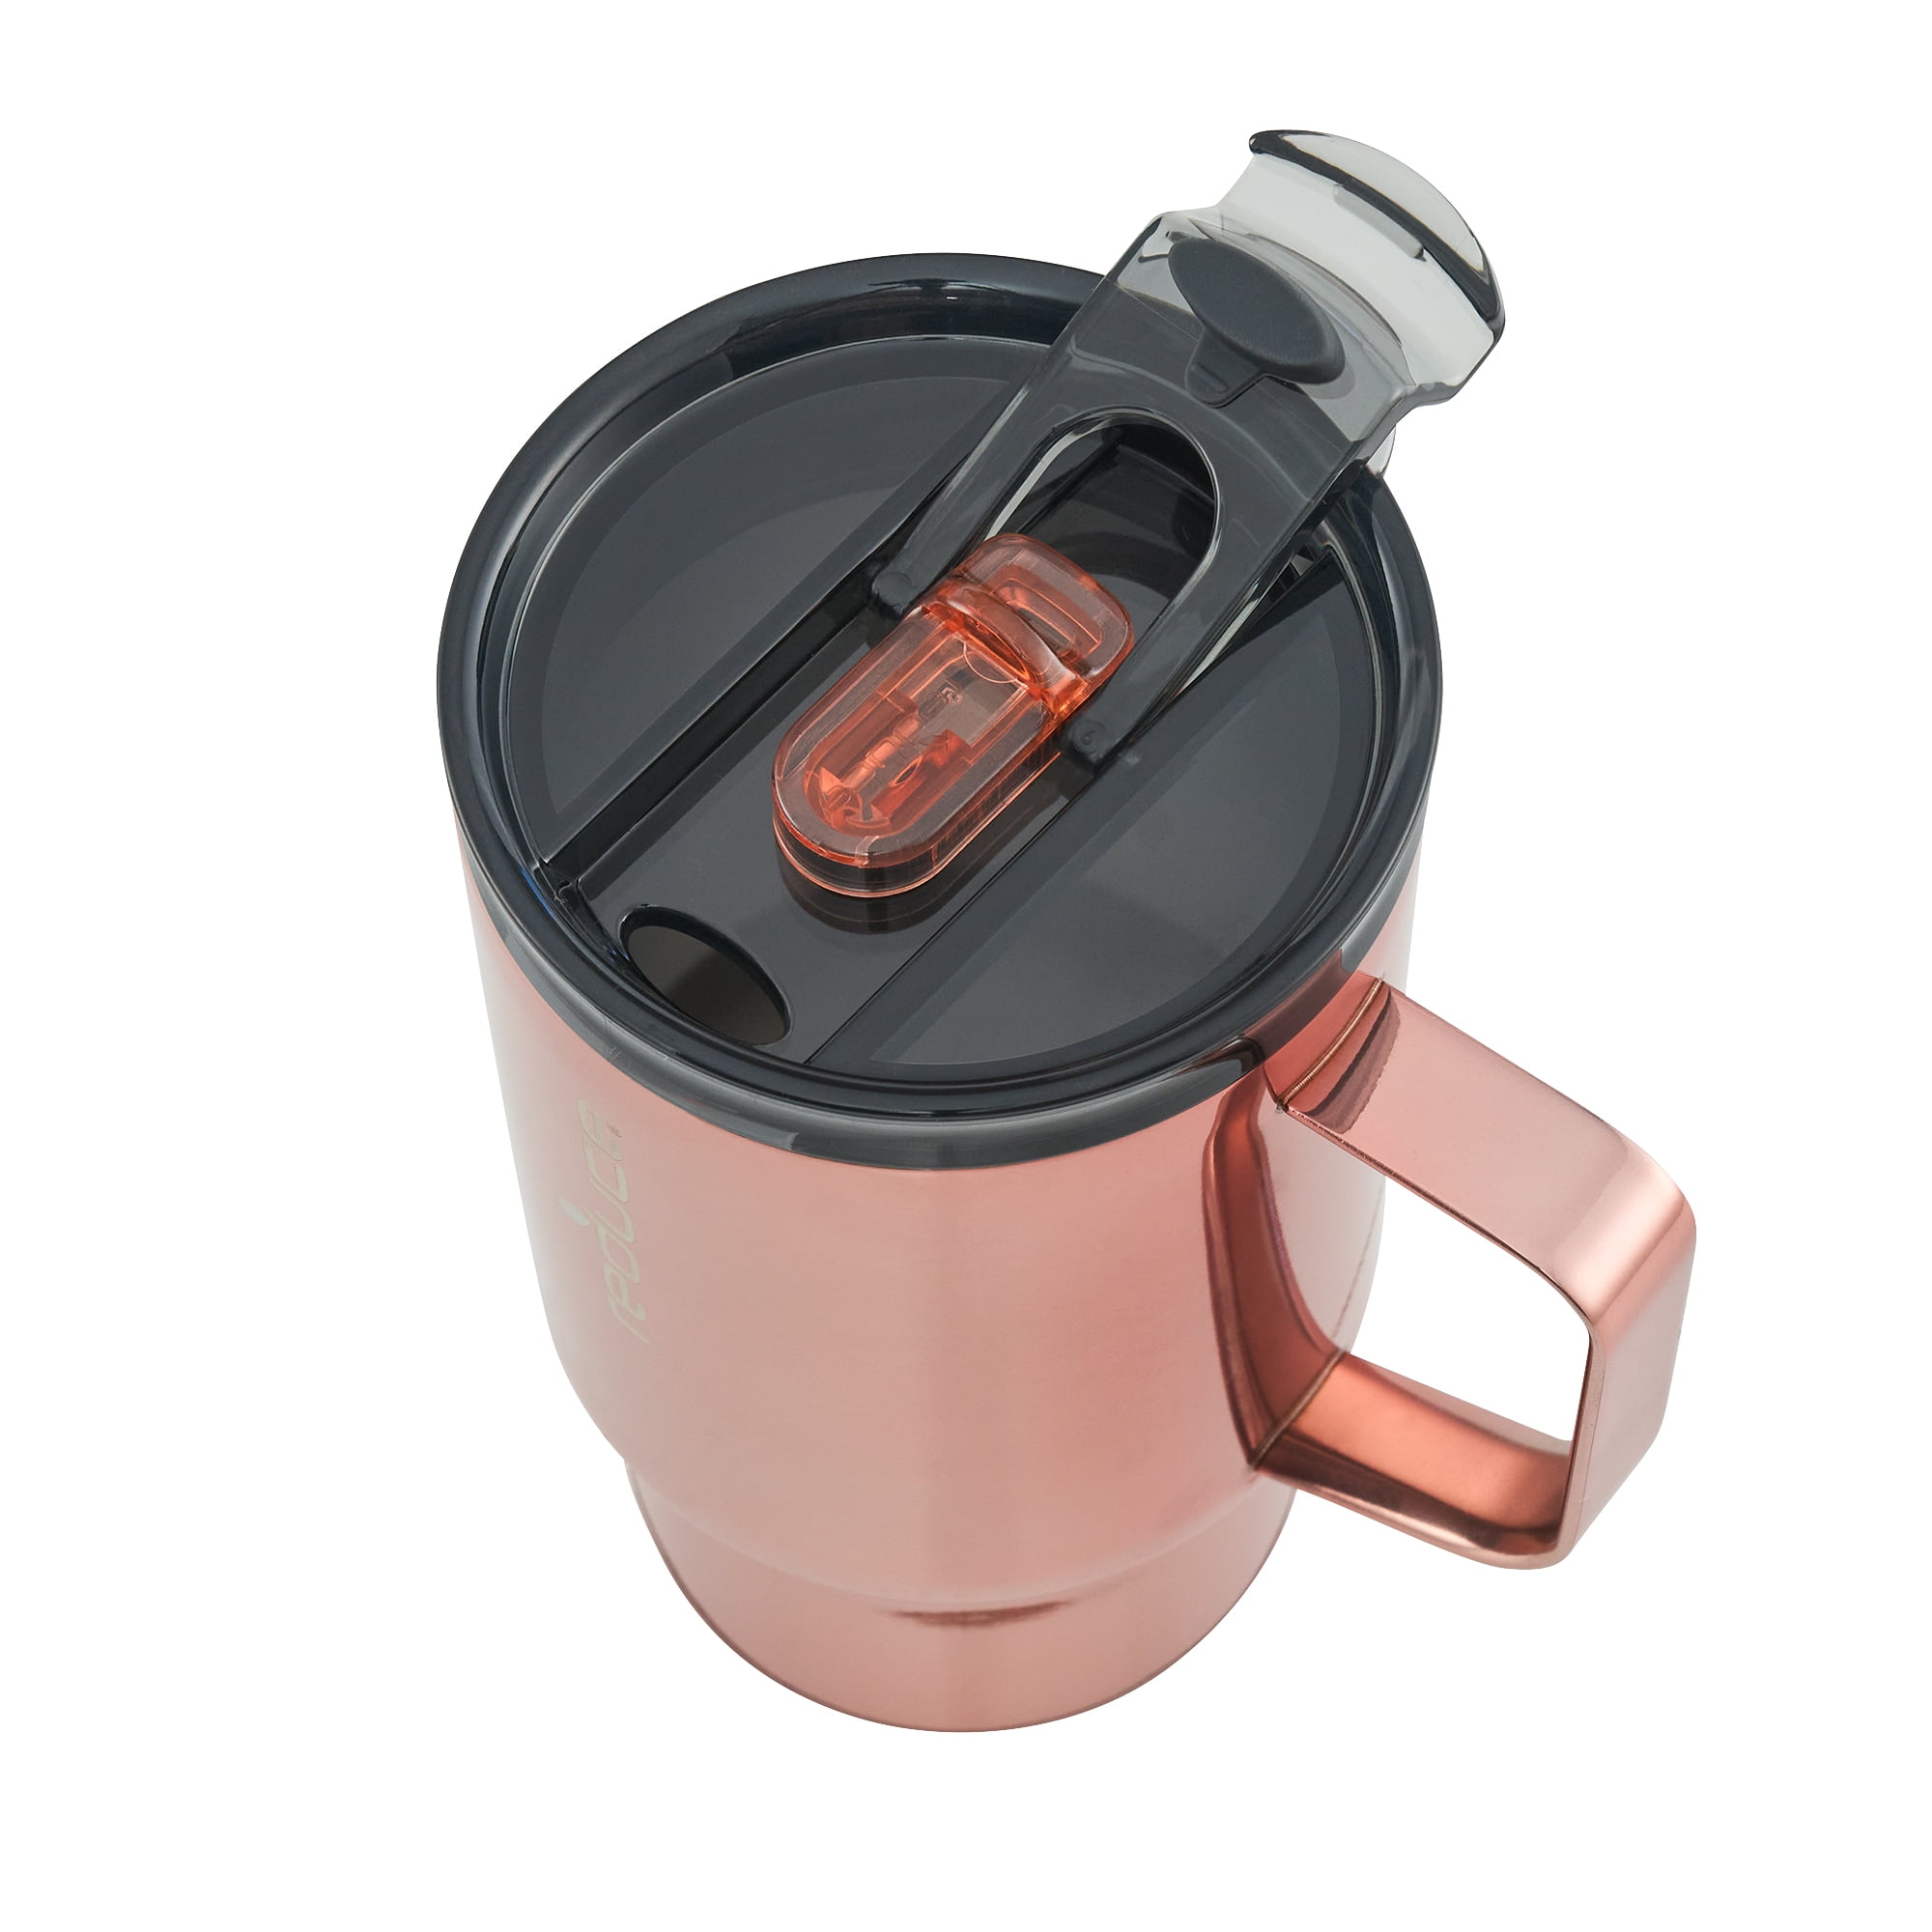 Christmas Insulated Glass Coffee Cup With Lid, Straw, Leather Strap  350ml/450ml, Heat Resistant Coffee & Tea Mug R230712 From Qiuti19, $13.67